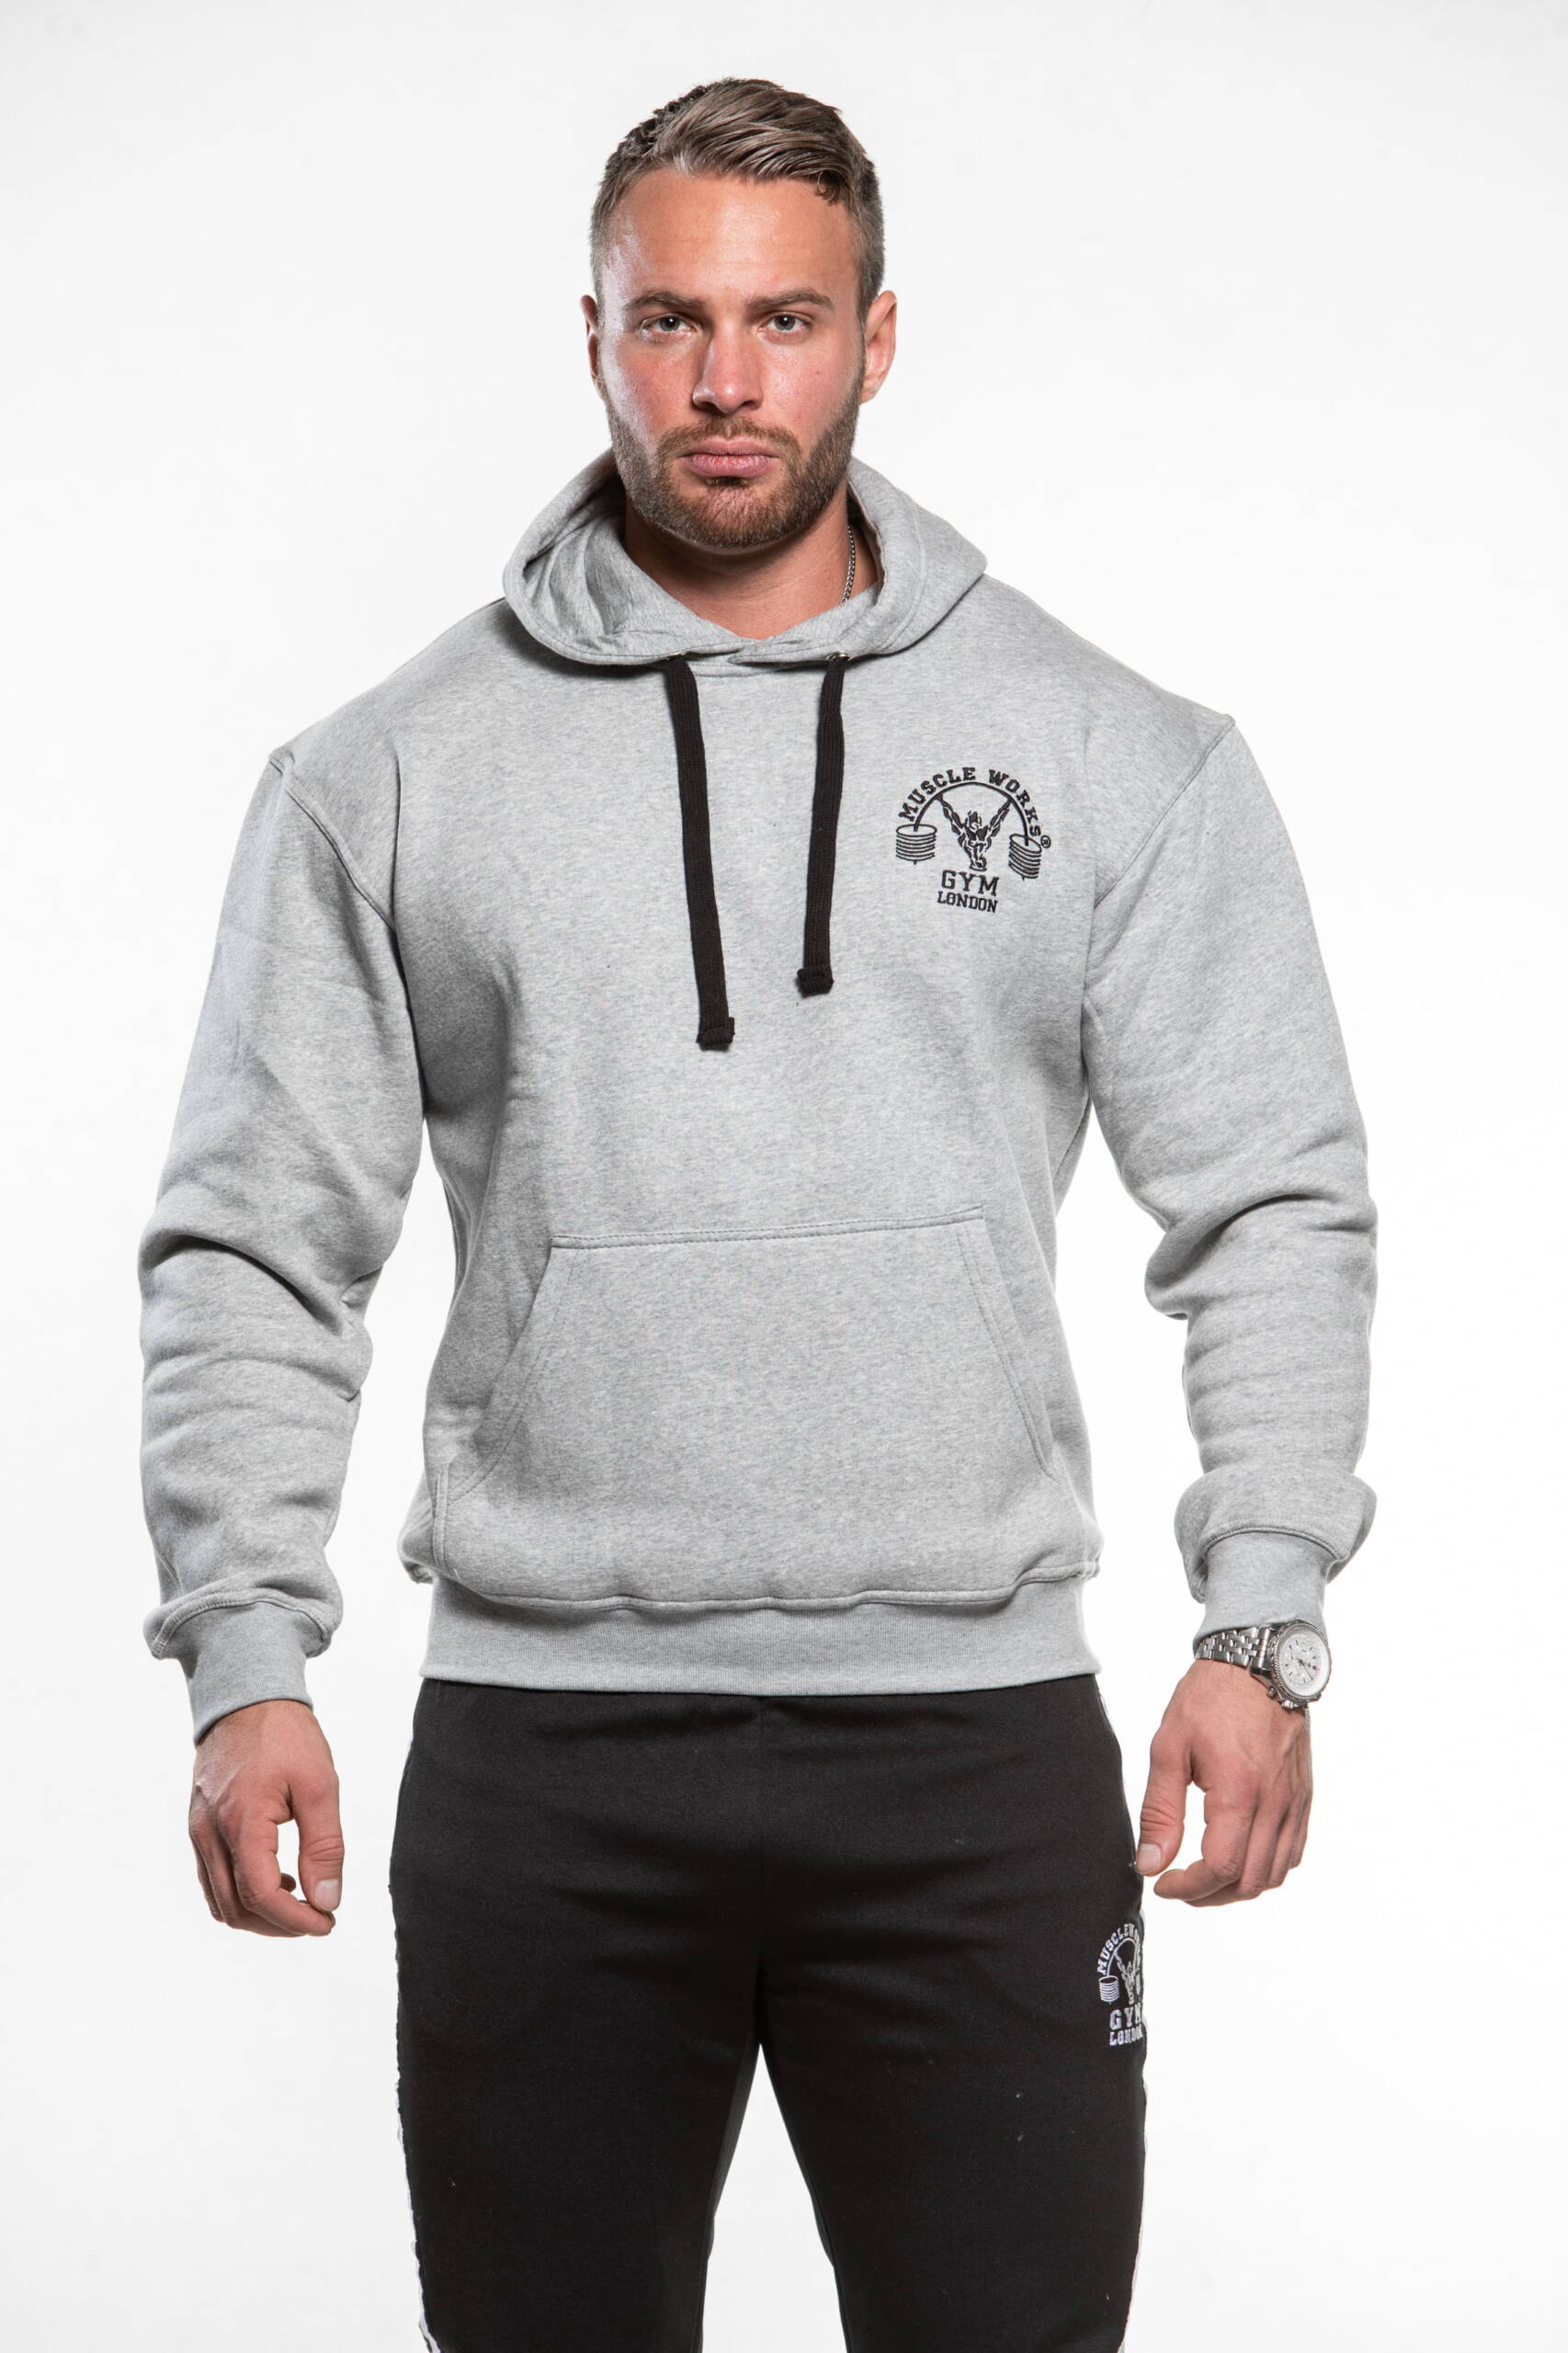 MW Classic Pullover Grey With Black - East London Gym - Bodybuilding ...